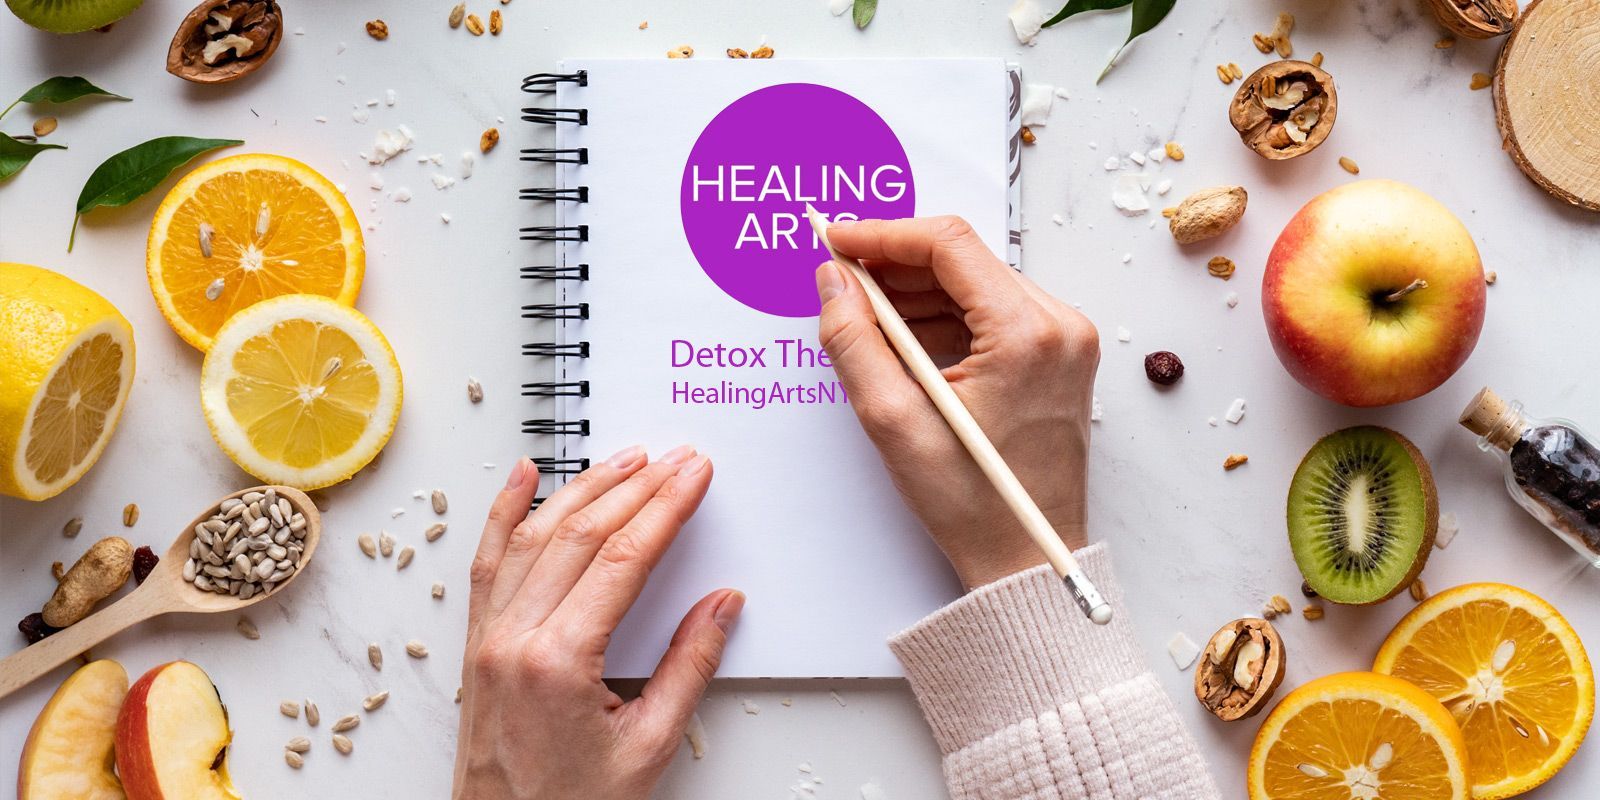 Detoxification Therapies NYC by Dr. Alicia Armitstead. Detoxification Therapy with Natural Remedies at Healing Arts NYC Health and Wellness Center in Manhattan, NY 10017